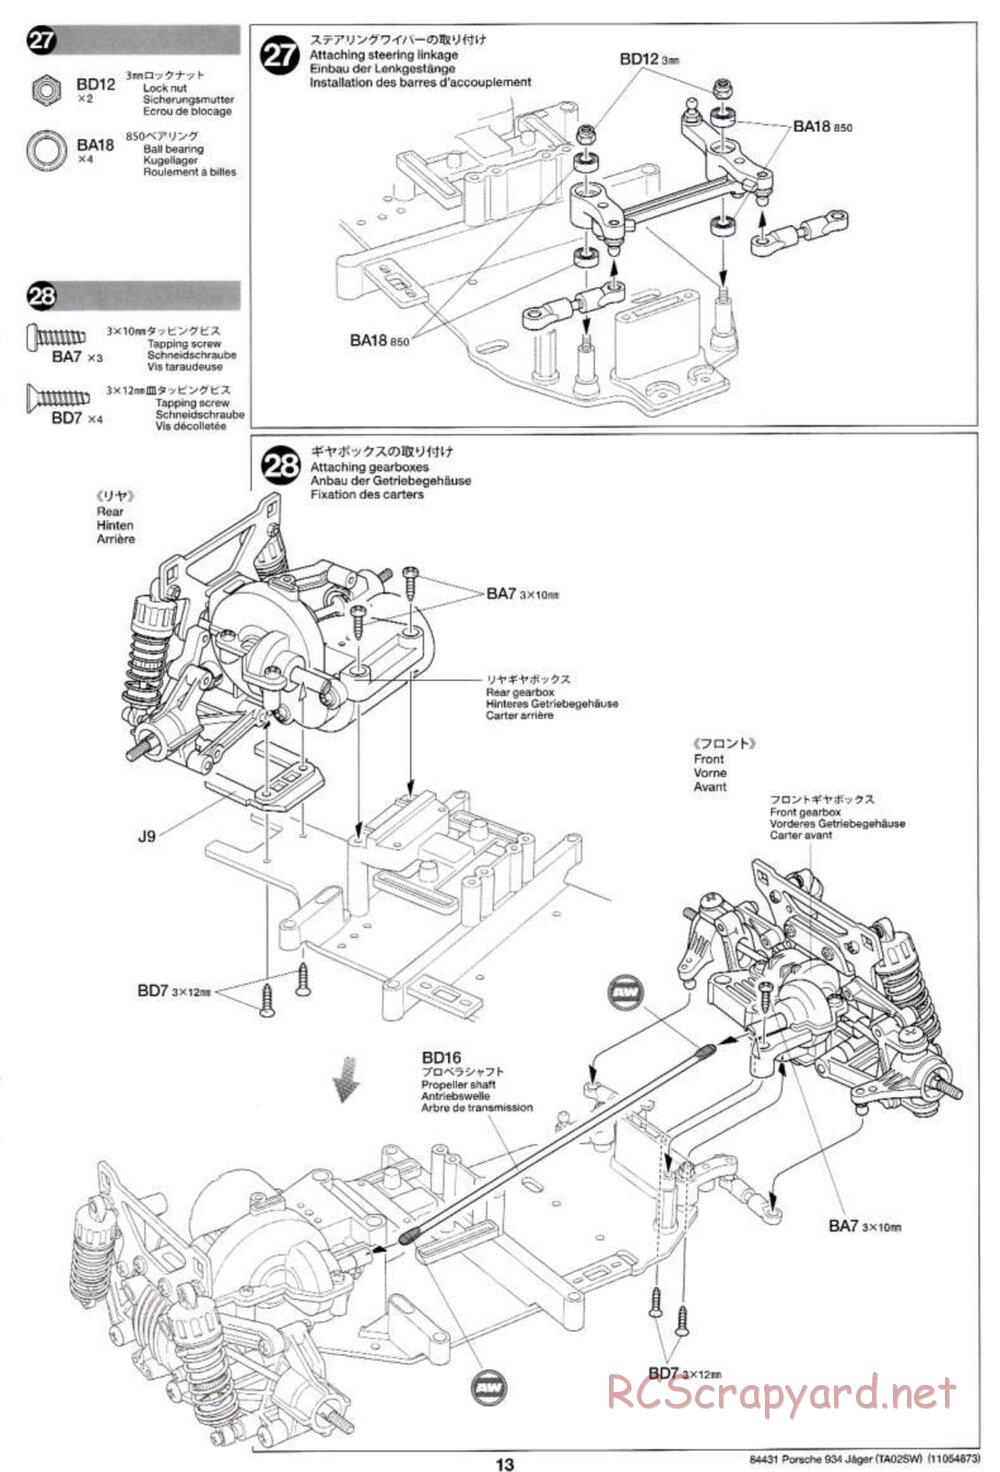 Tamiya - Porsche Turbo RSR Type 934 Jagermeister - TA-02SW Chassis - Manual - Page 13